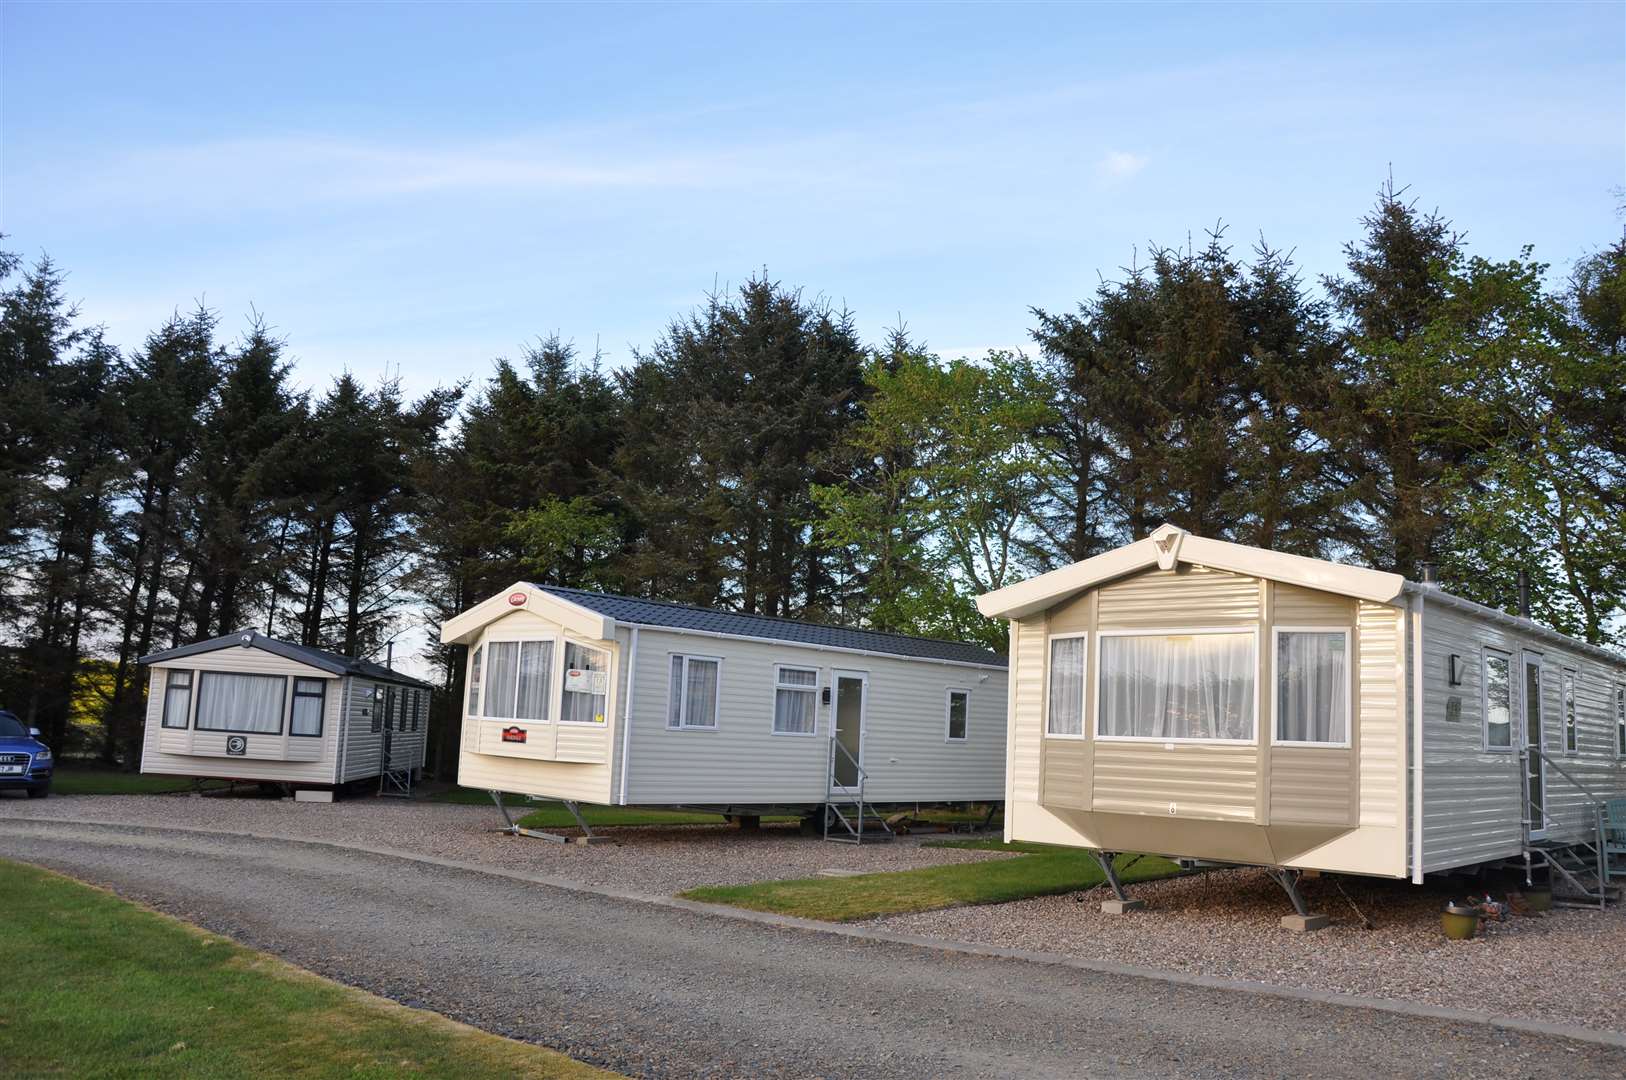 Myrus Holiday Park has been named as the top caravan site in Scotland by an industry magazine.